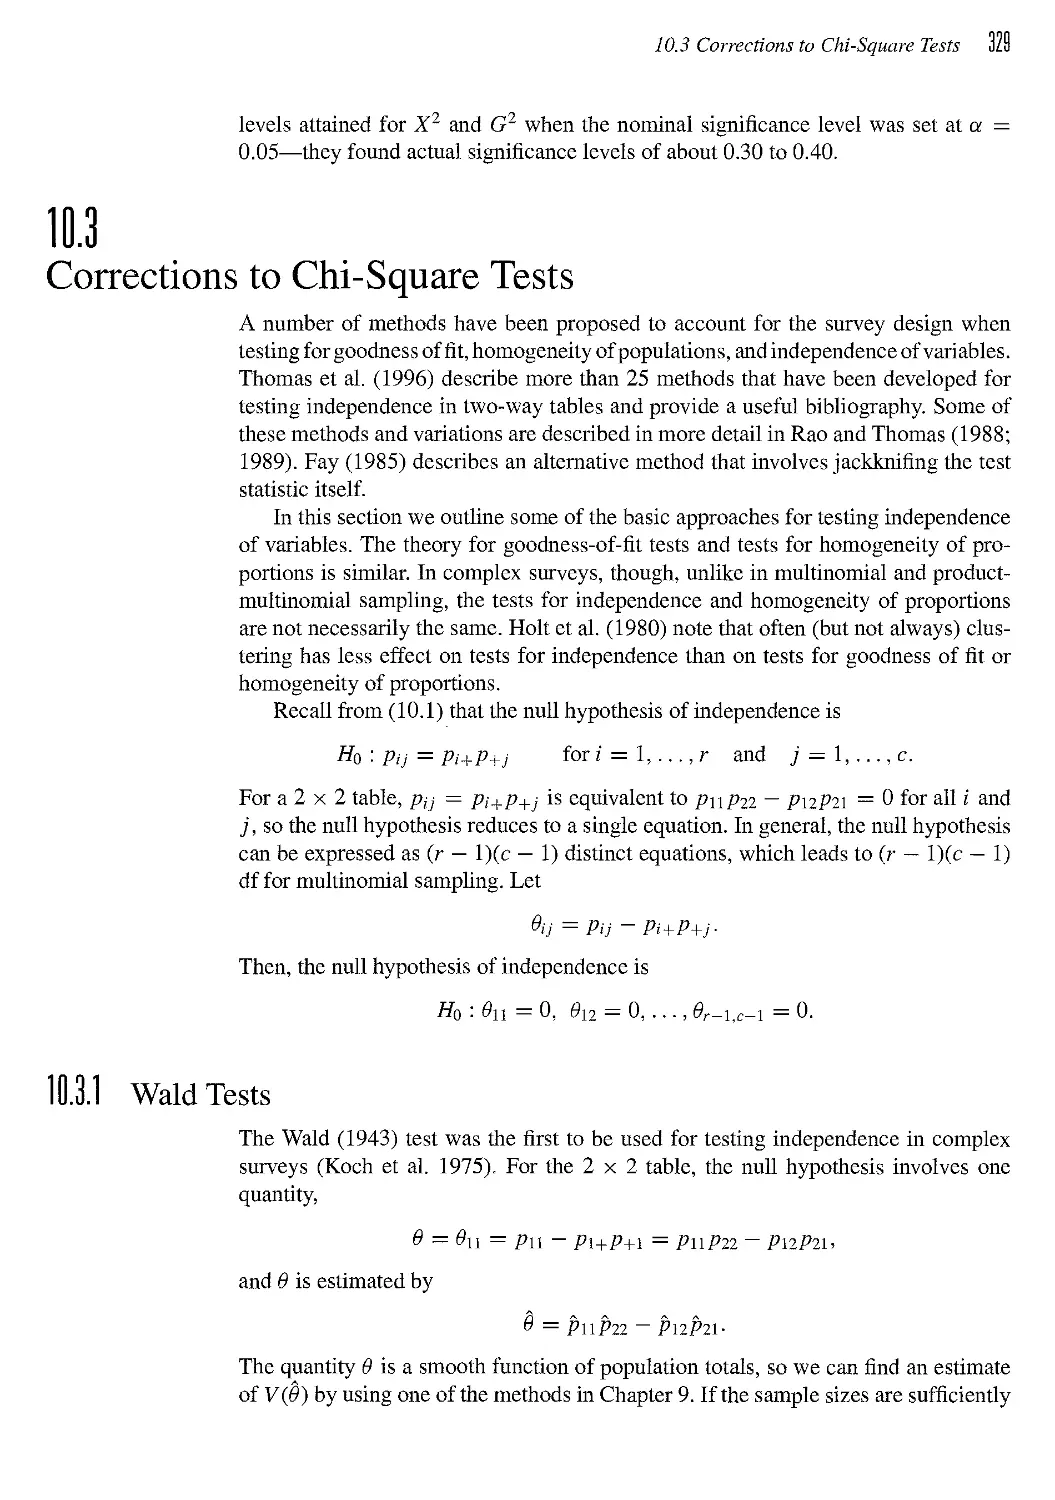 10.3 Corrections to Chi-Square Tests